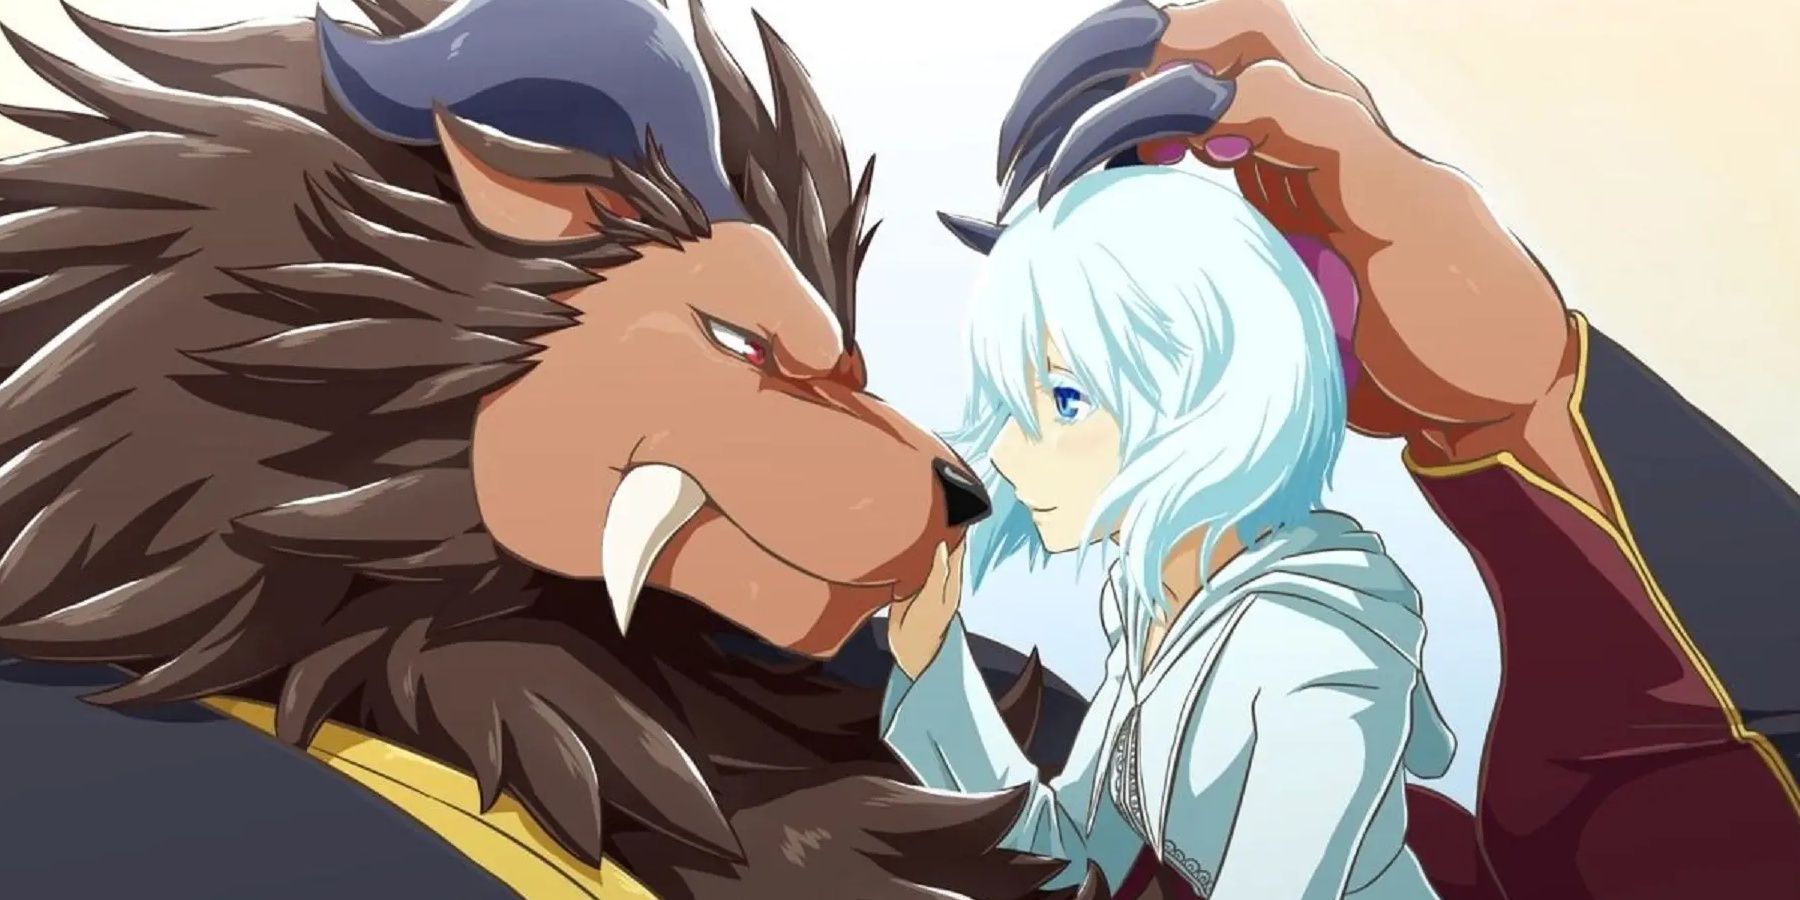 An anime lion and white haired girl